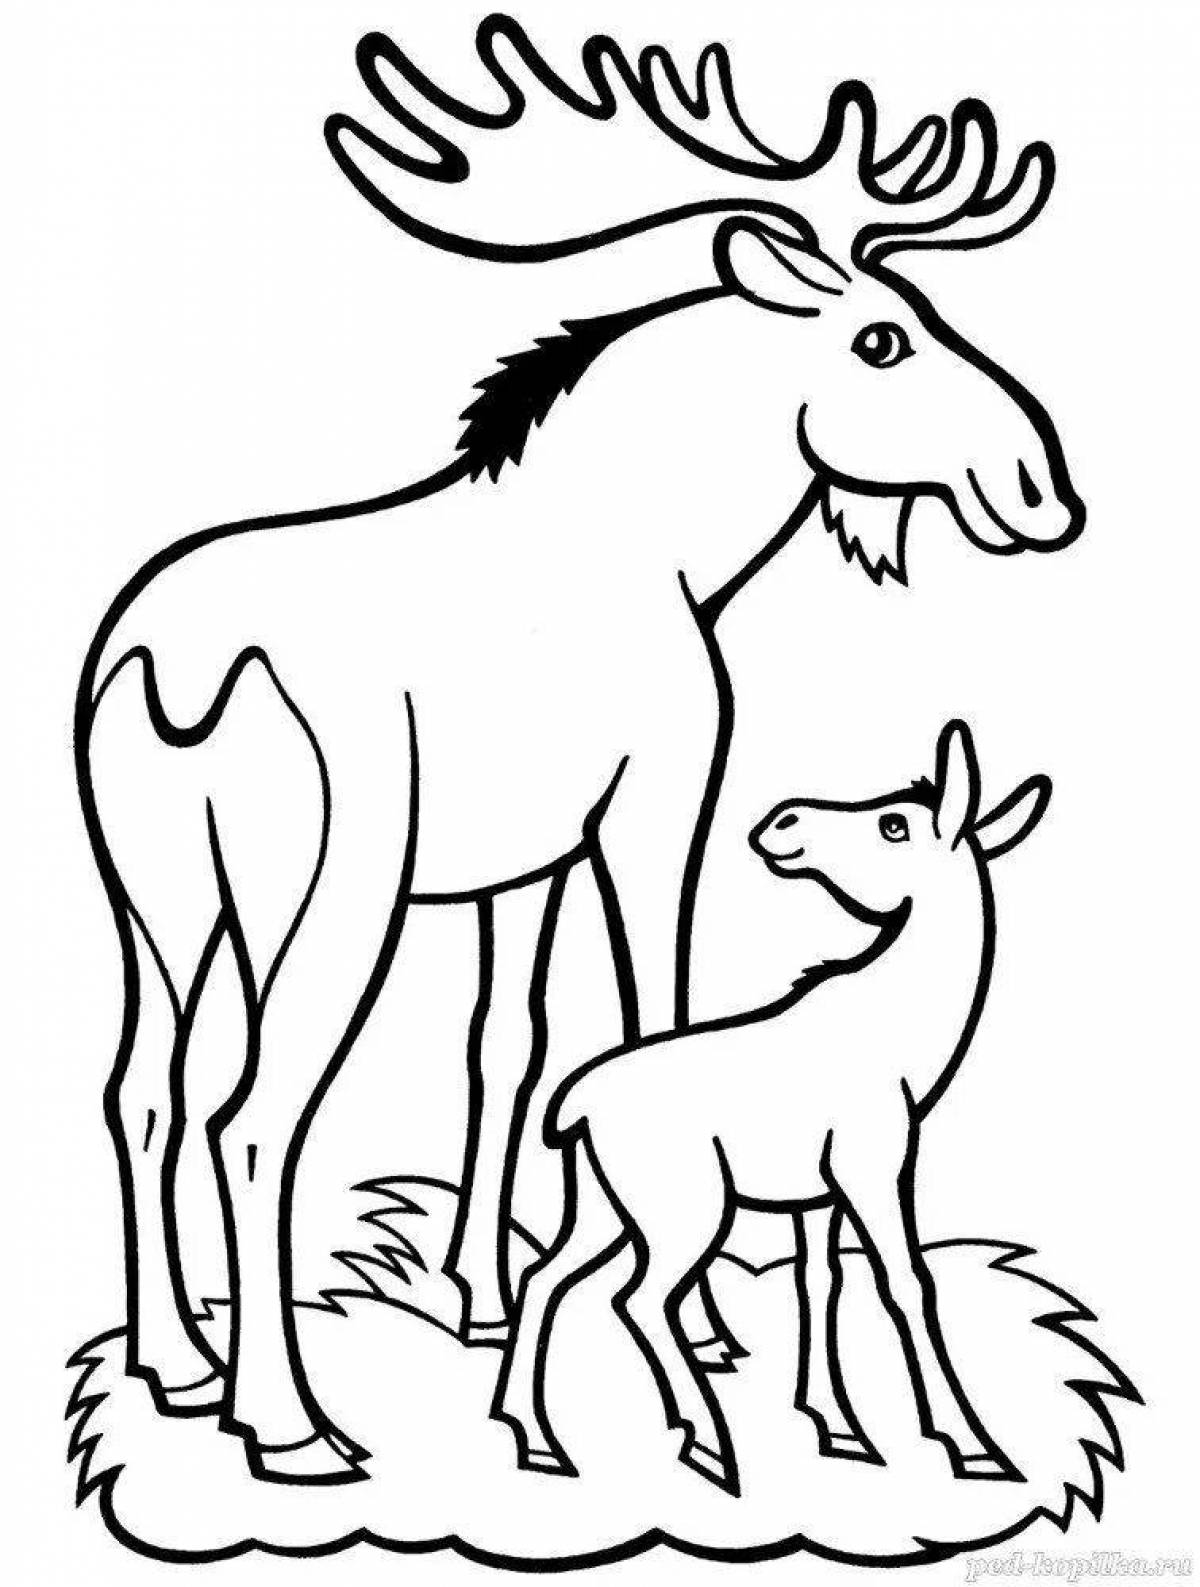 Coloring page cute wild animal and baby